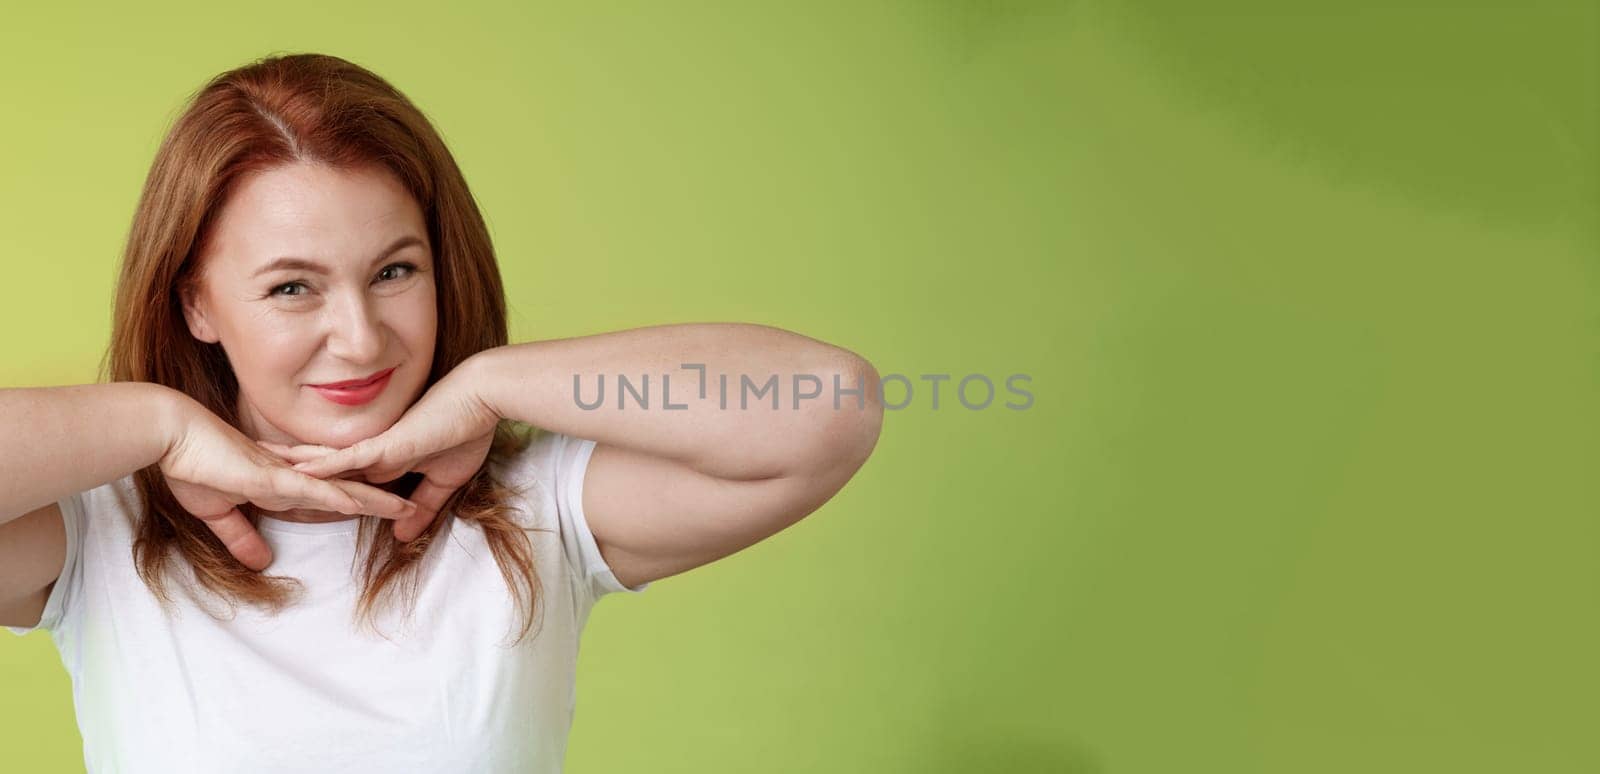 Aging, cosmetology, wellbeing concept. Happy self-assured redhead woman hold hands under jawline smiling showing facial blemished self-accepting wrinkles applying skincare product green background.